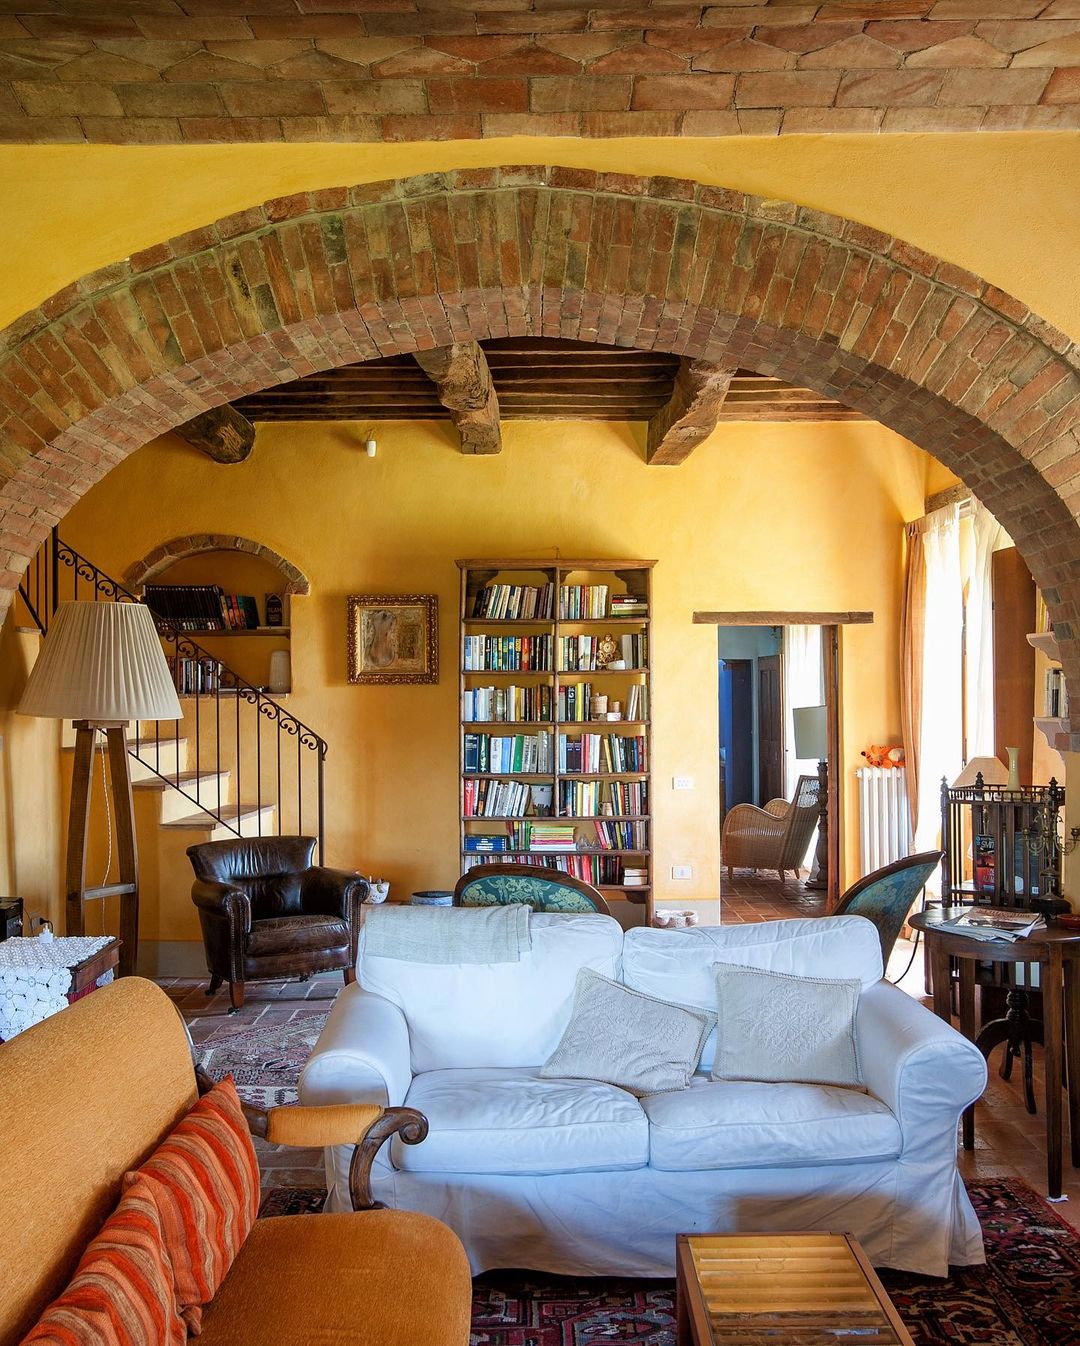 Turnkey Tuscan Farmhouse in the Val d’Orcia